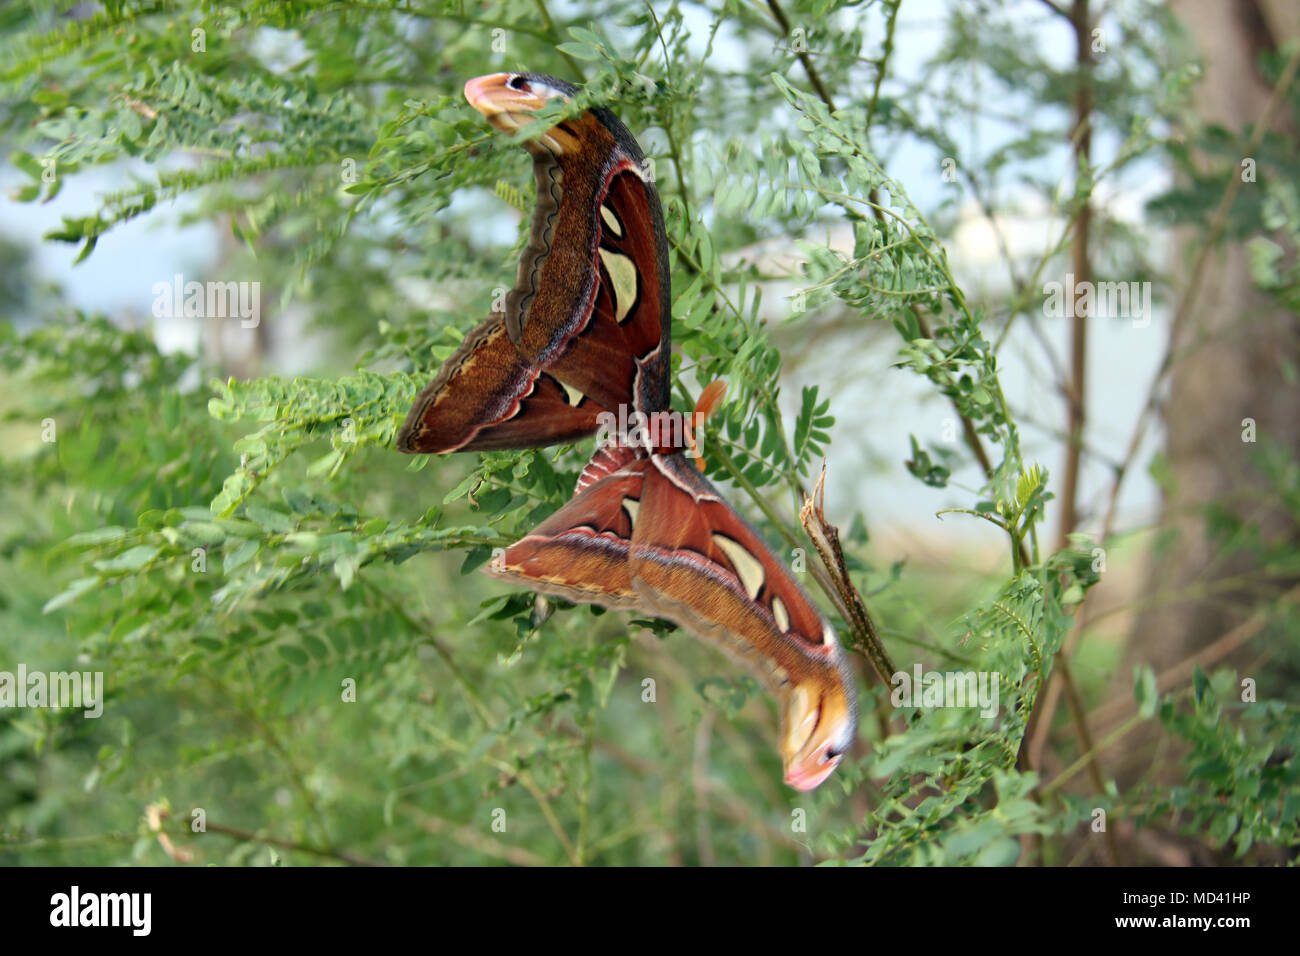 Butterfly on twigs. Stock Photo